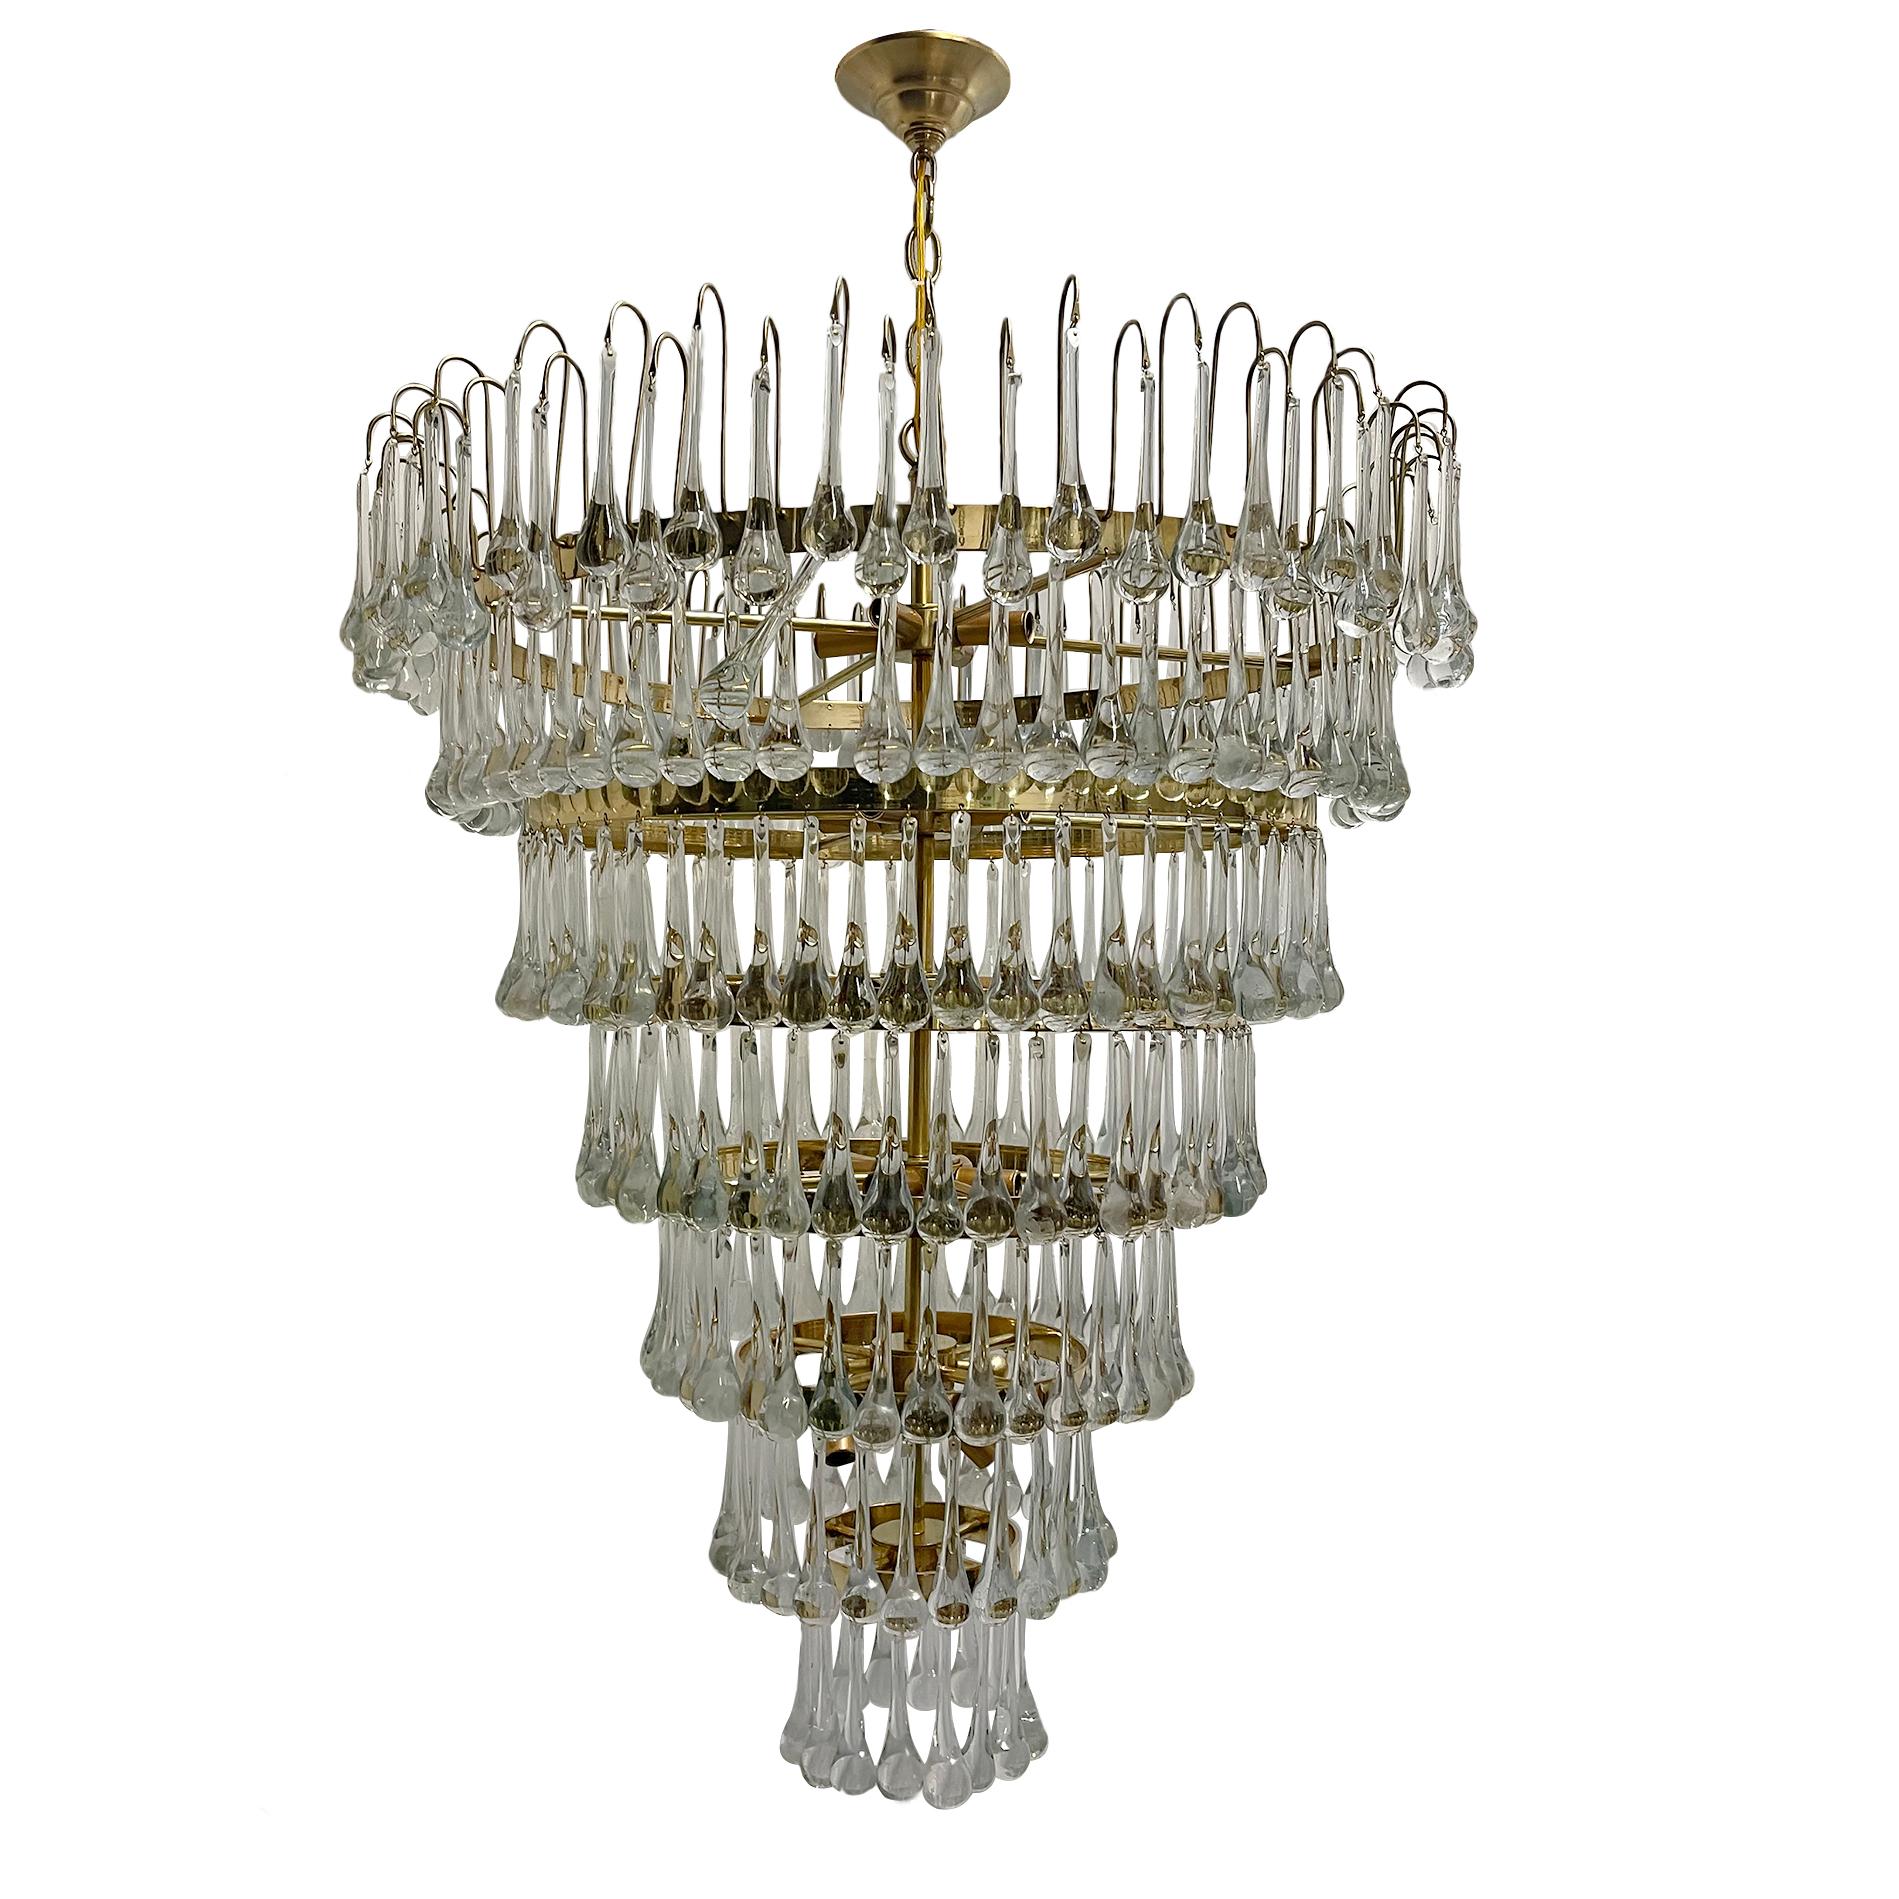 A circa 1960's Italian mid century cascading multi-tiered chandelier with oversized glass drops.

Measurements:
Height 36